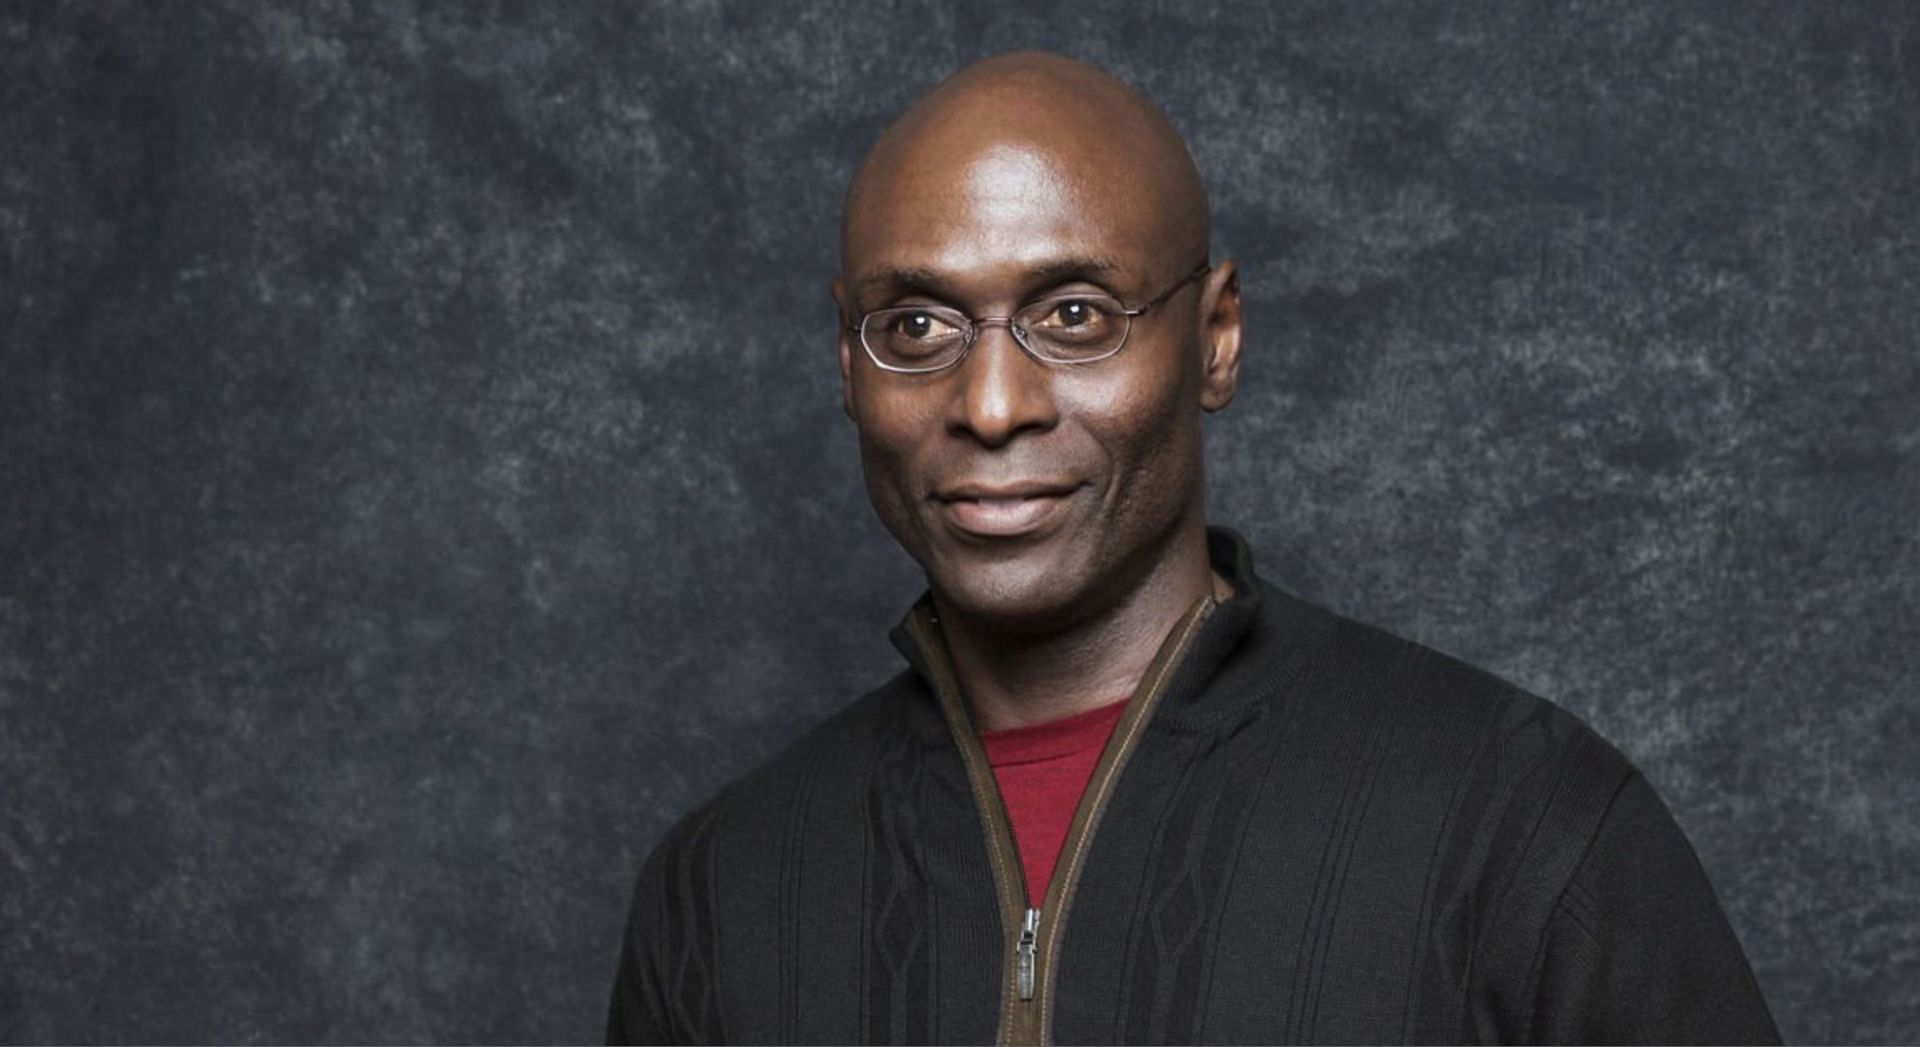 John Wick star Lance Reddick suddenly passed away at the age of 60 (Image via Getty Images)